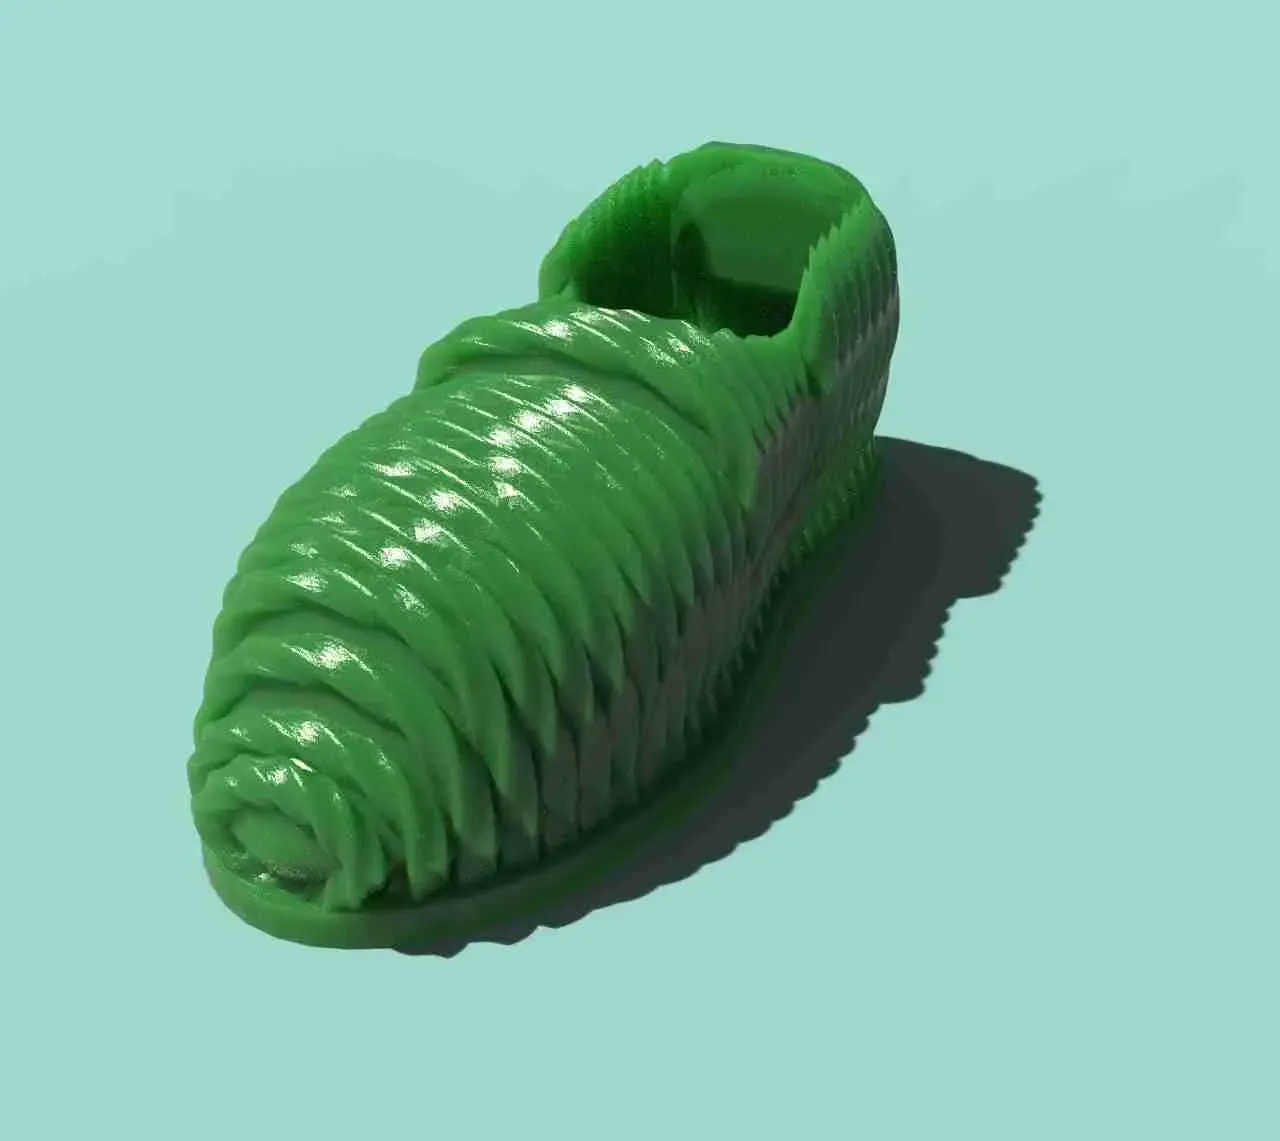 WORM SHOES